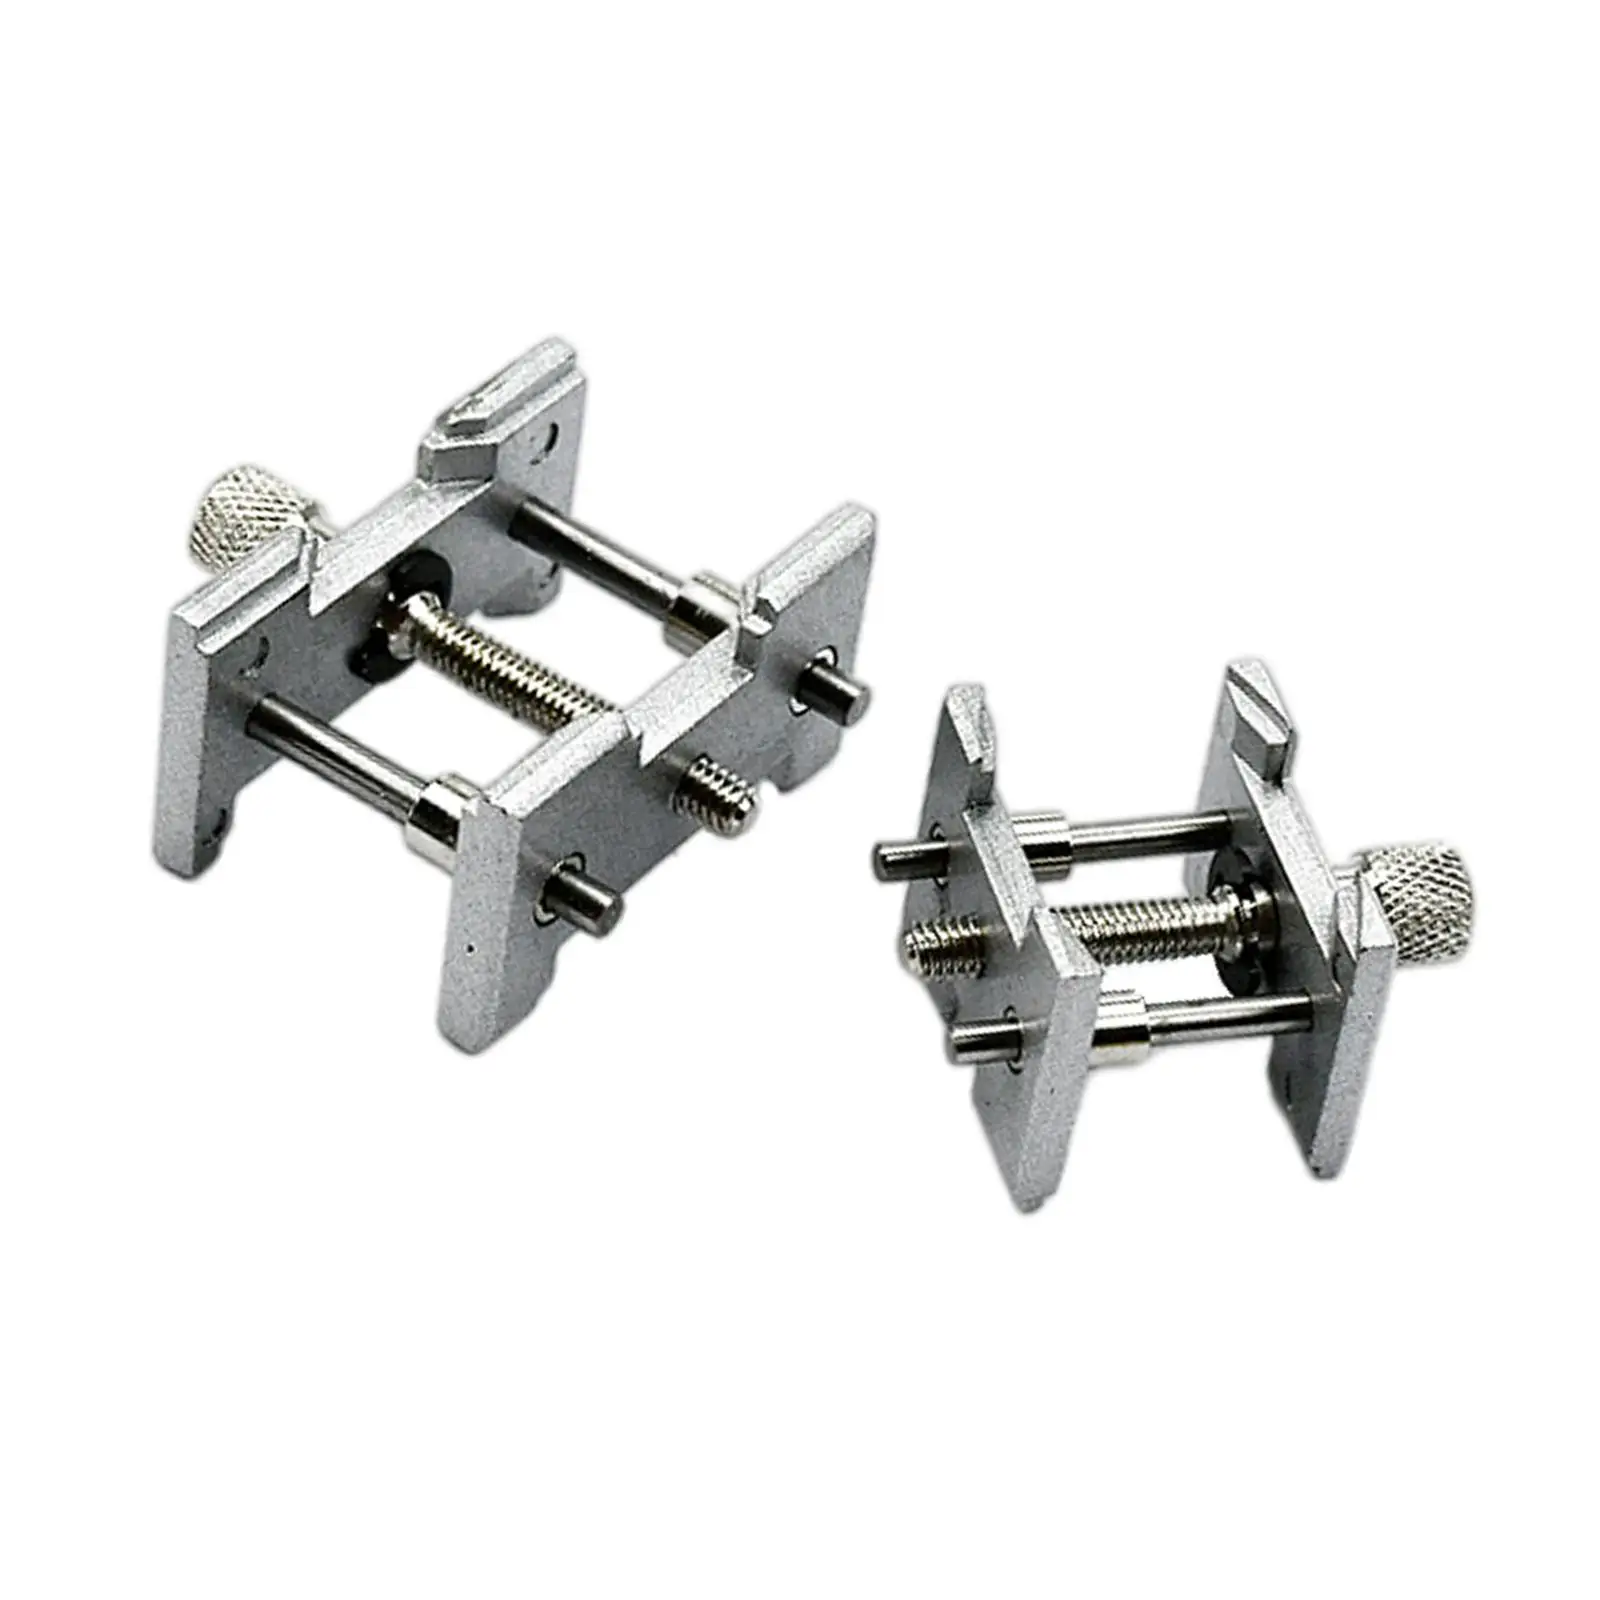 2Pcs Watch Movement Holder Maintenance Extensible Alloy, Reversible Clip, Fixed Base, Opening Holder, for Watchmaker, Accessory